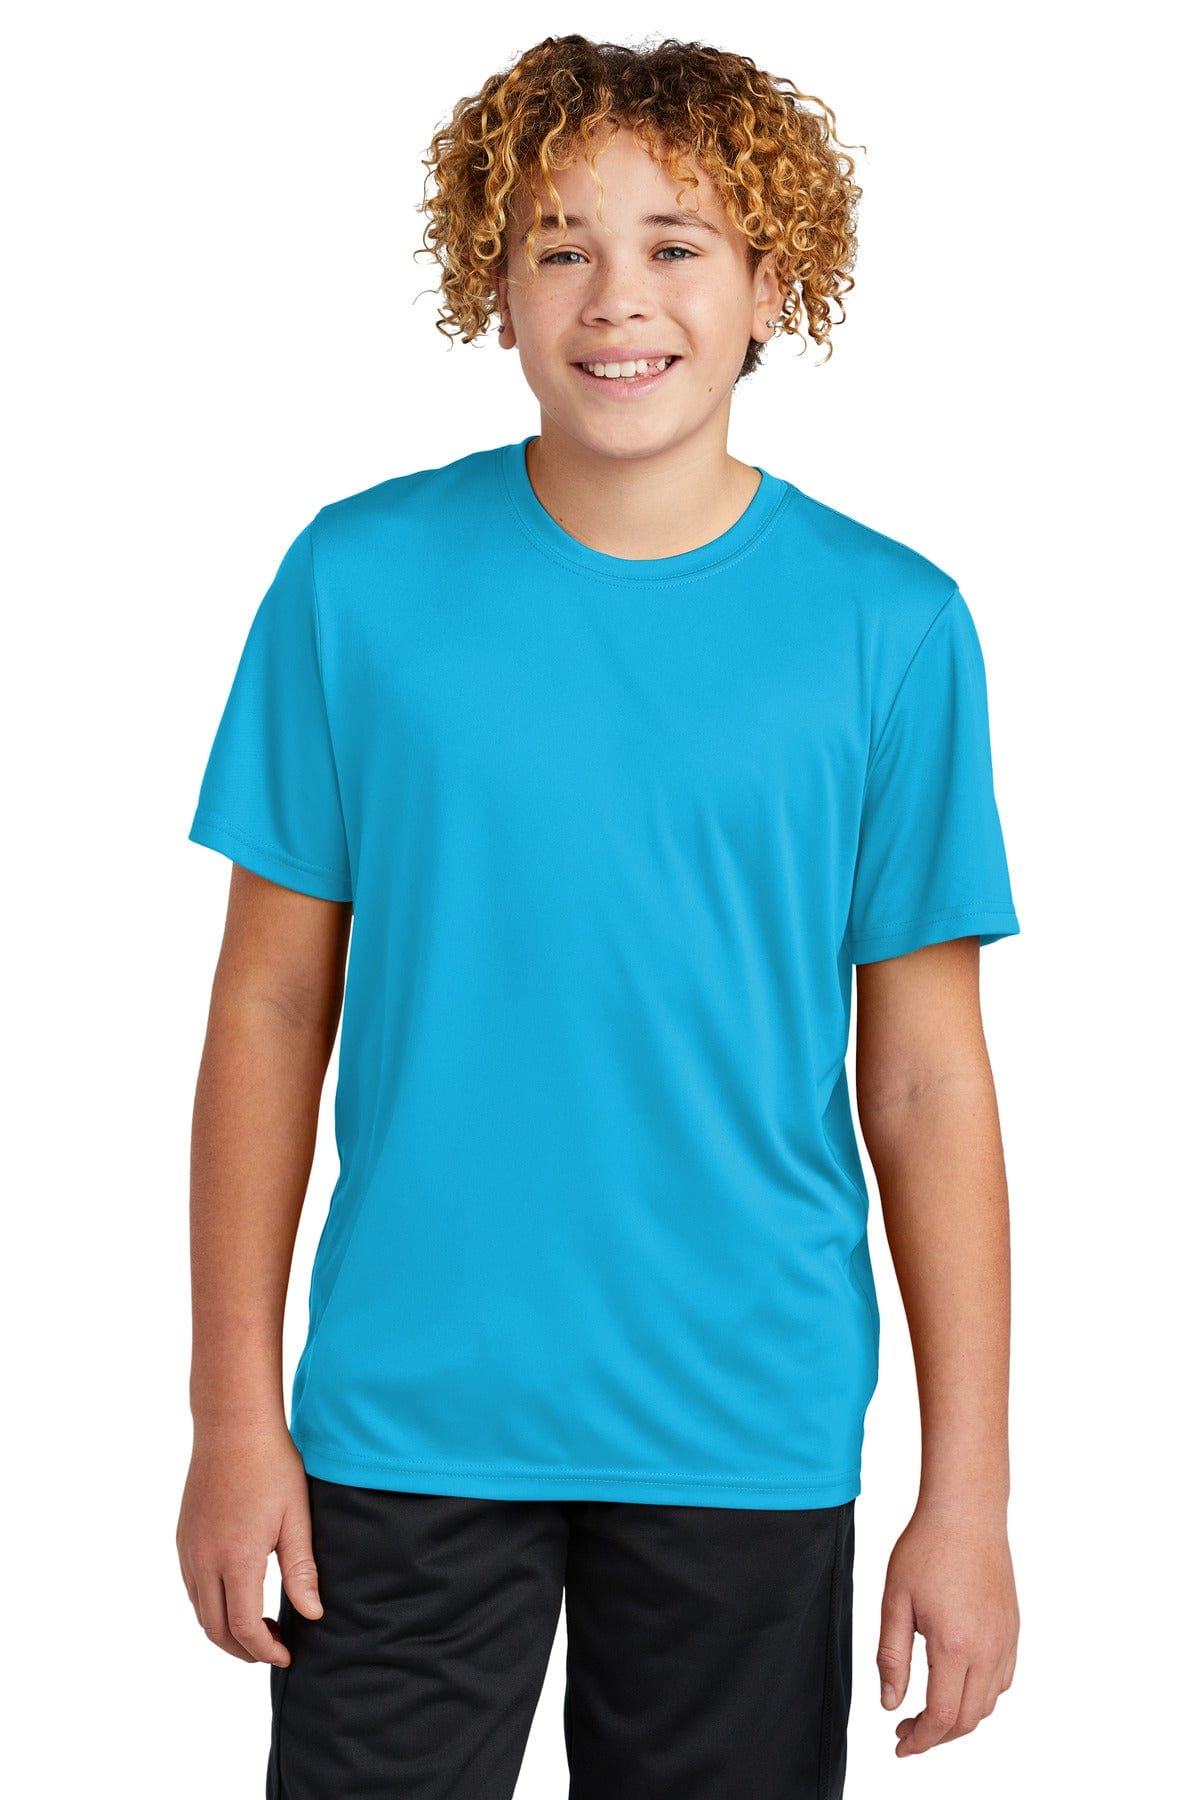 Sport-Tek ® Youth PosiCharge ® Re-Compete Tee YST720